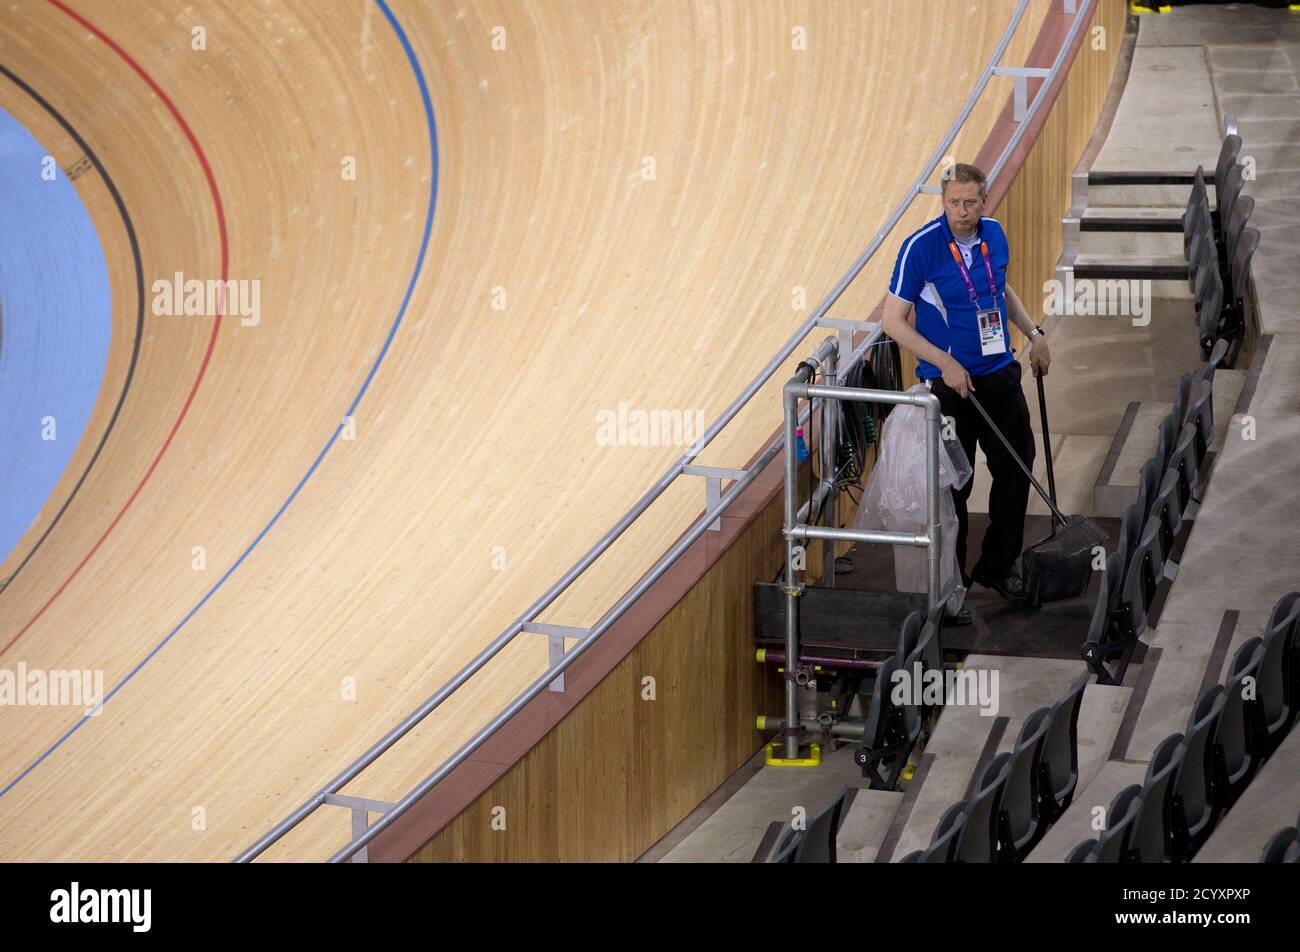 Olympic Workers clean the Velodrome in preparation for athletes at the Olympic Park in Stratford, east London, 19 July 2012 REUTERS/Neil Hall (BRITAIN - Tags: SPORT OLYMPICS CYCLING) Stock Photo